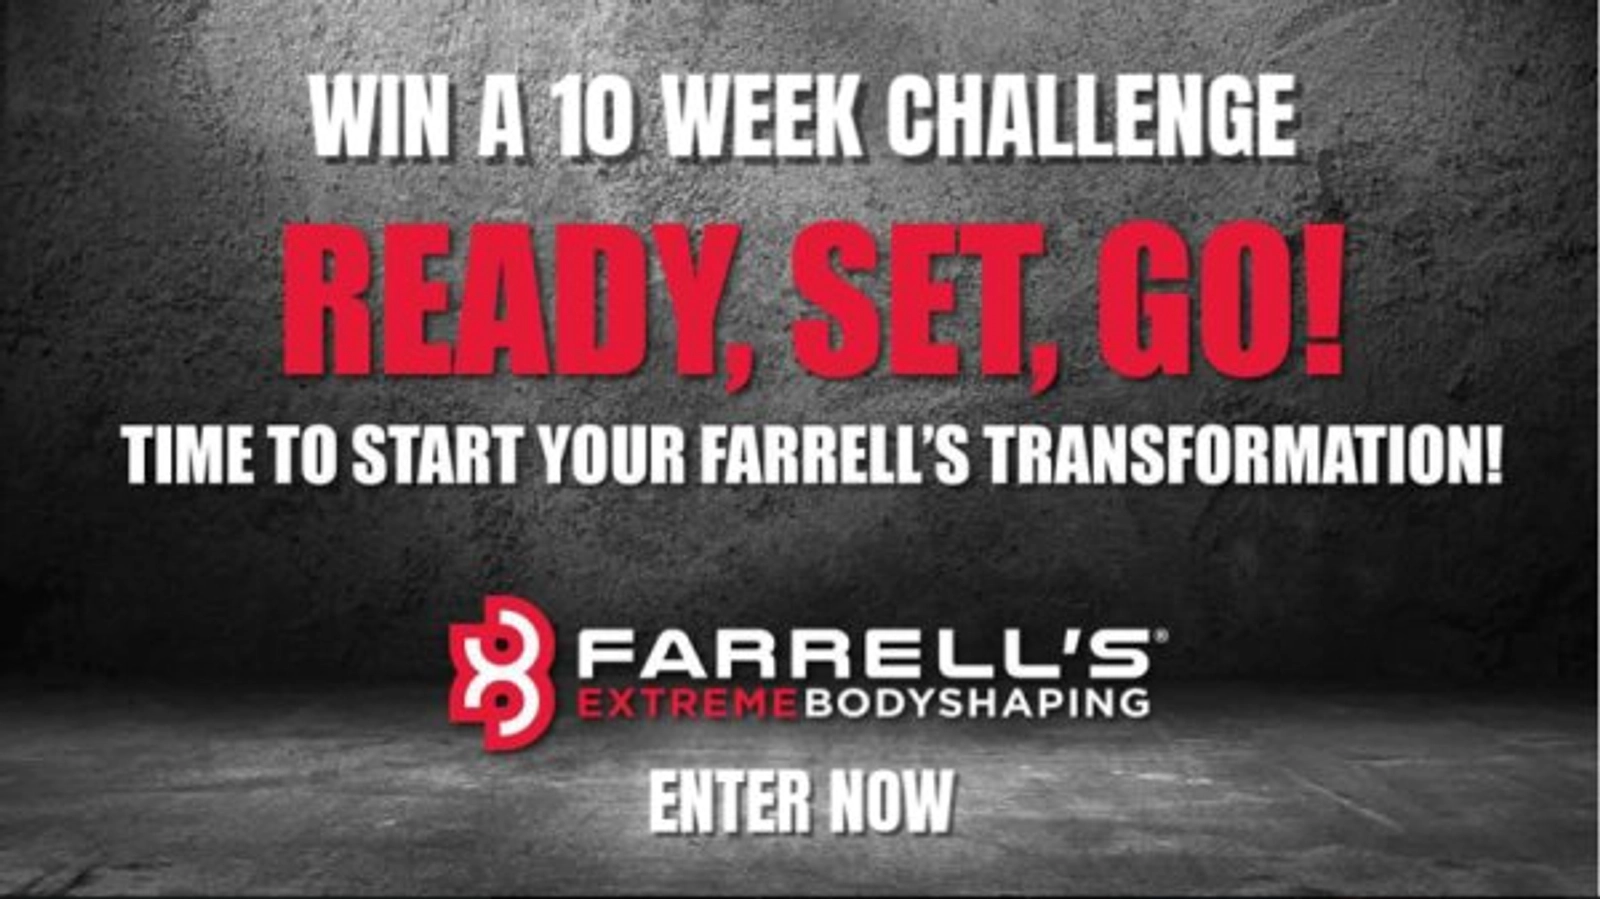 Win a Farrell's eXtreme Bodyshaping 10 Week Challenge! - Thumbnail Image